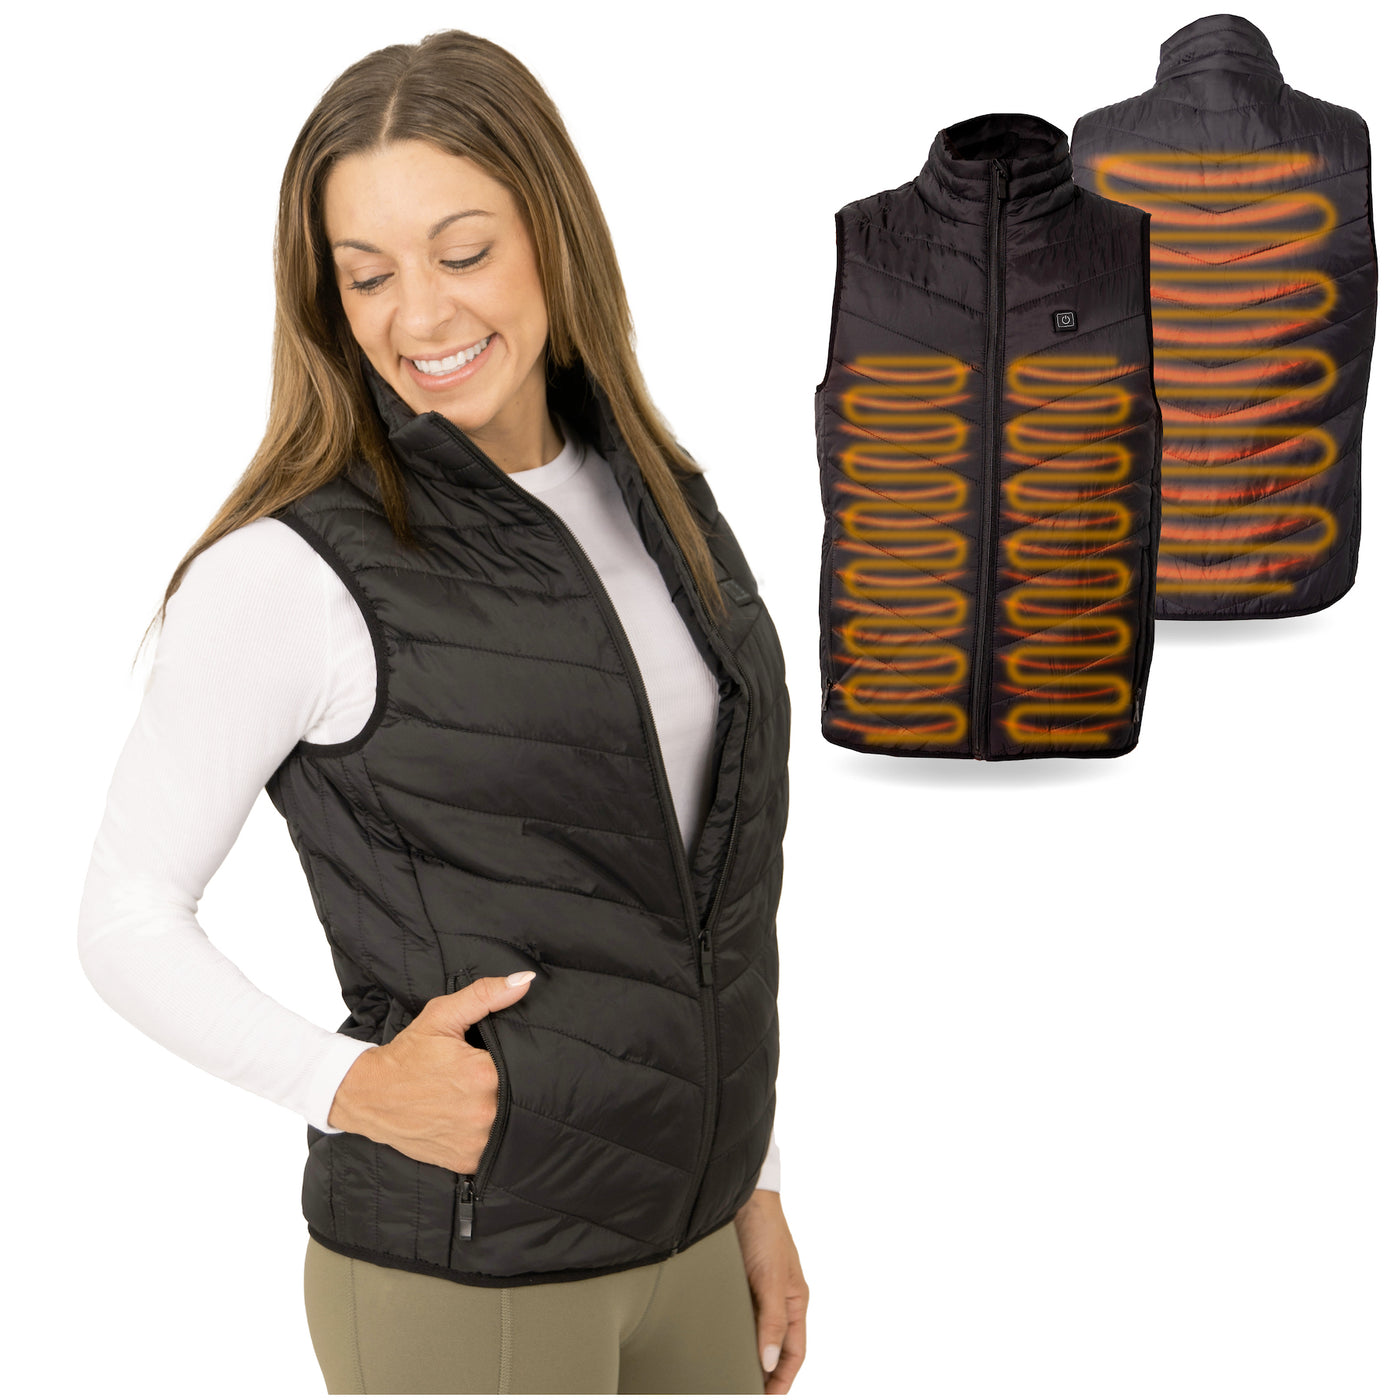 The BraceAbility rechargable heated vest will keep you warm outside while hunting or golfing